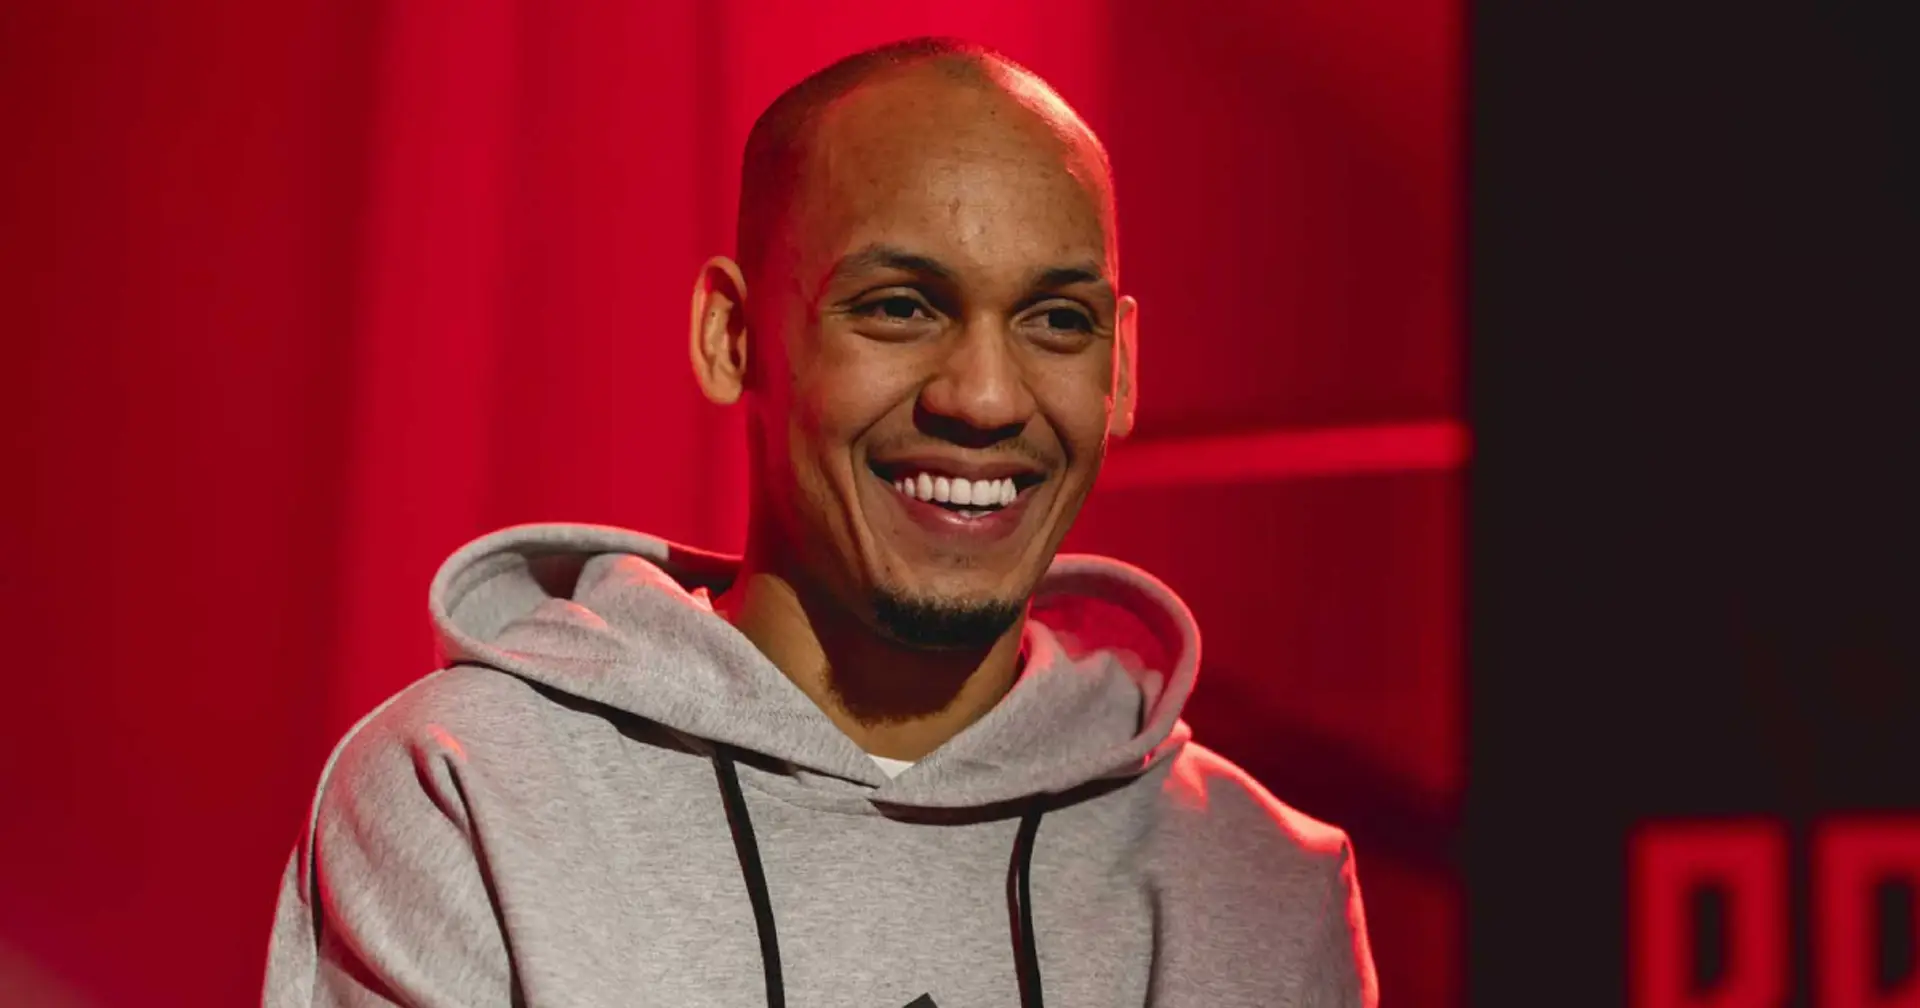 'This shows we can fight for bigger things': Fabinho on Liverpool's undefeated streak